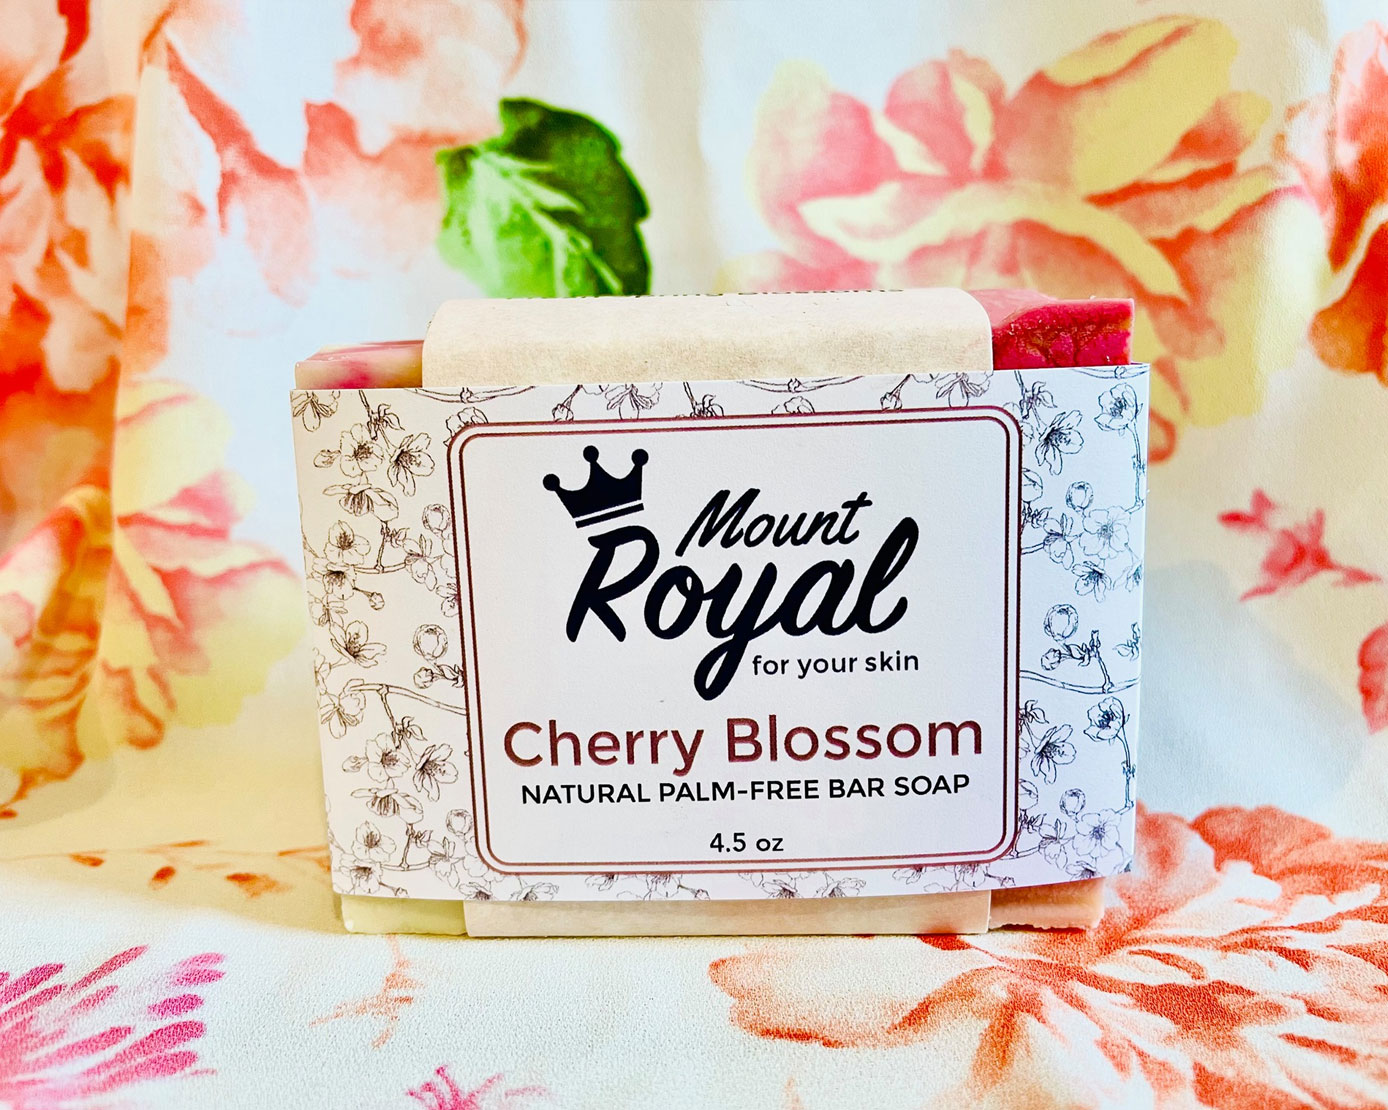 Cherry blossom scented soap bar in packaging that reads 